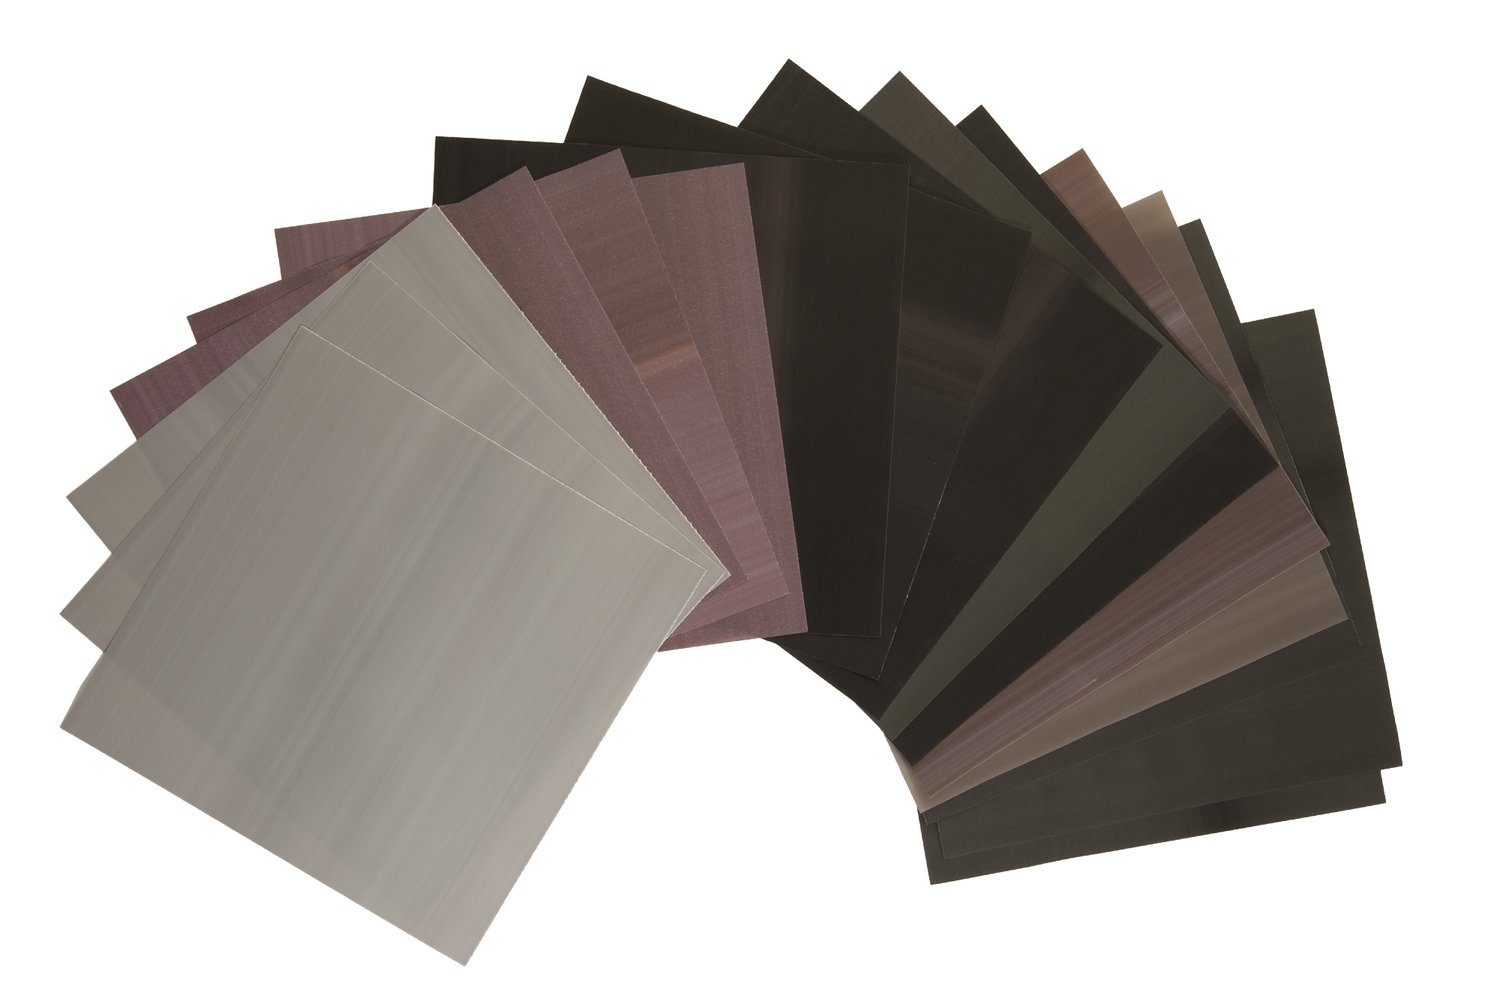 5x5, 20 sheets, Assorted Pack